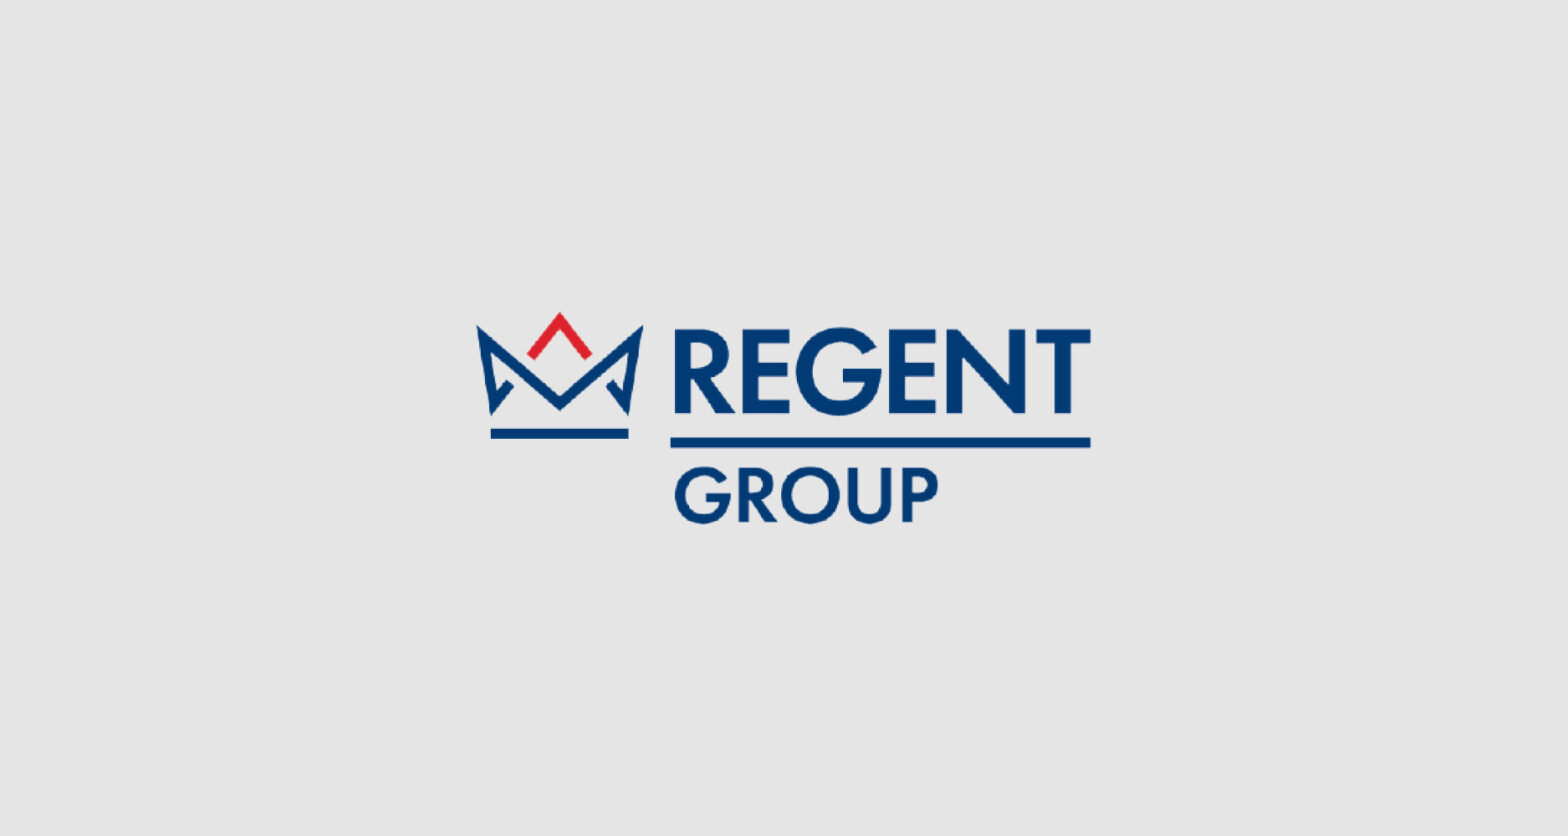 CWEIC welcomes Regent Group as a new Strategic Partner